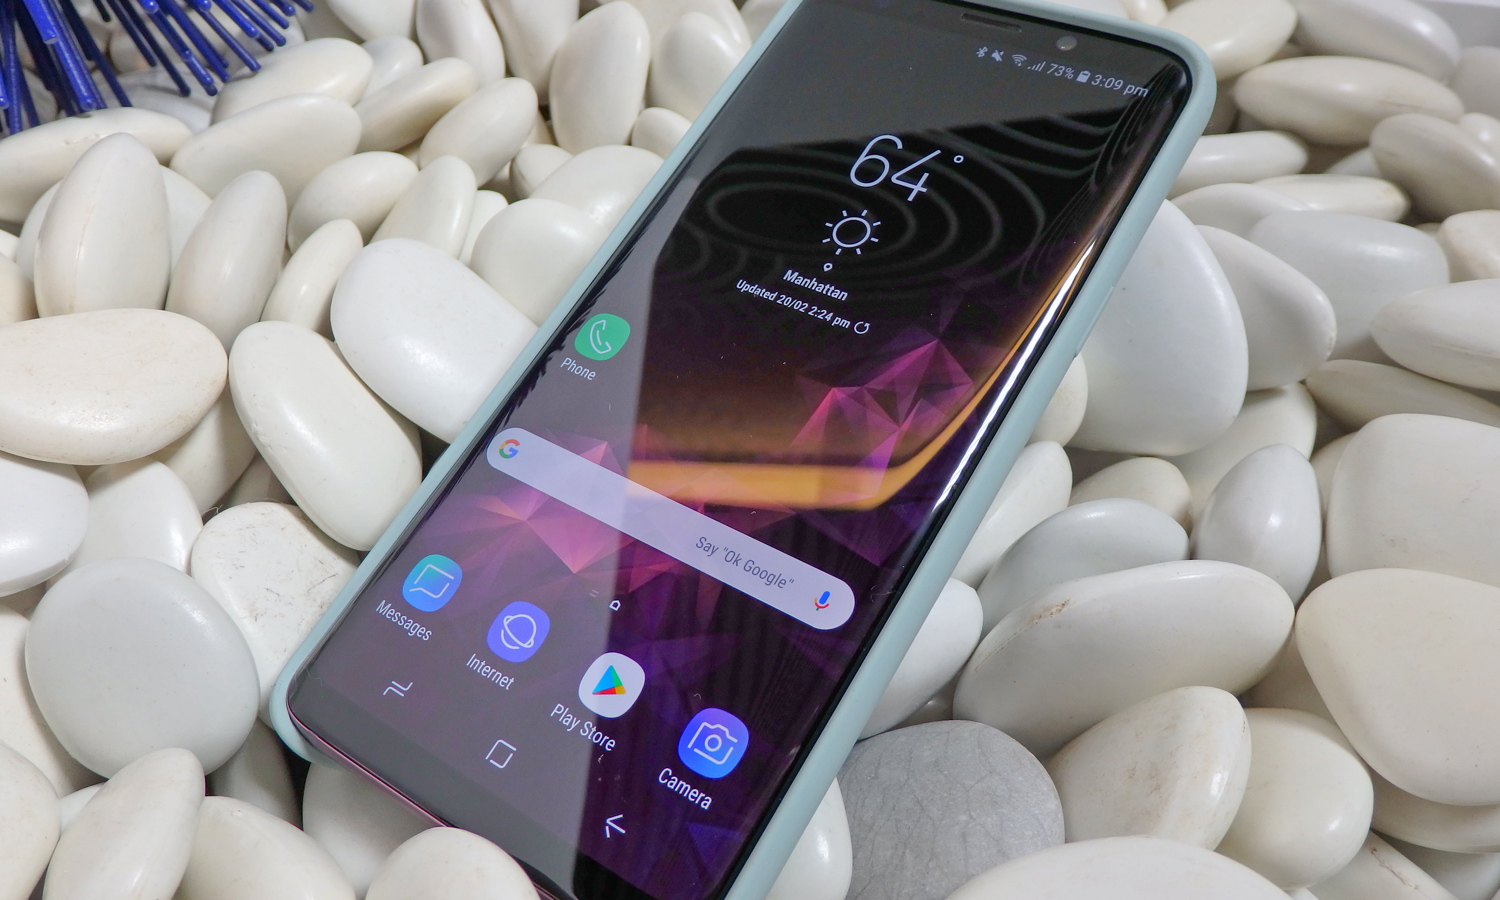 Galaxy S9 and S9+ camera review: Still waiting for the revolution